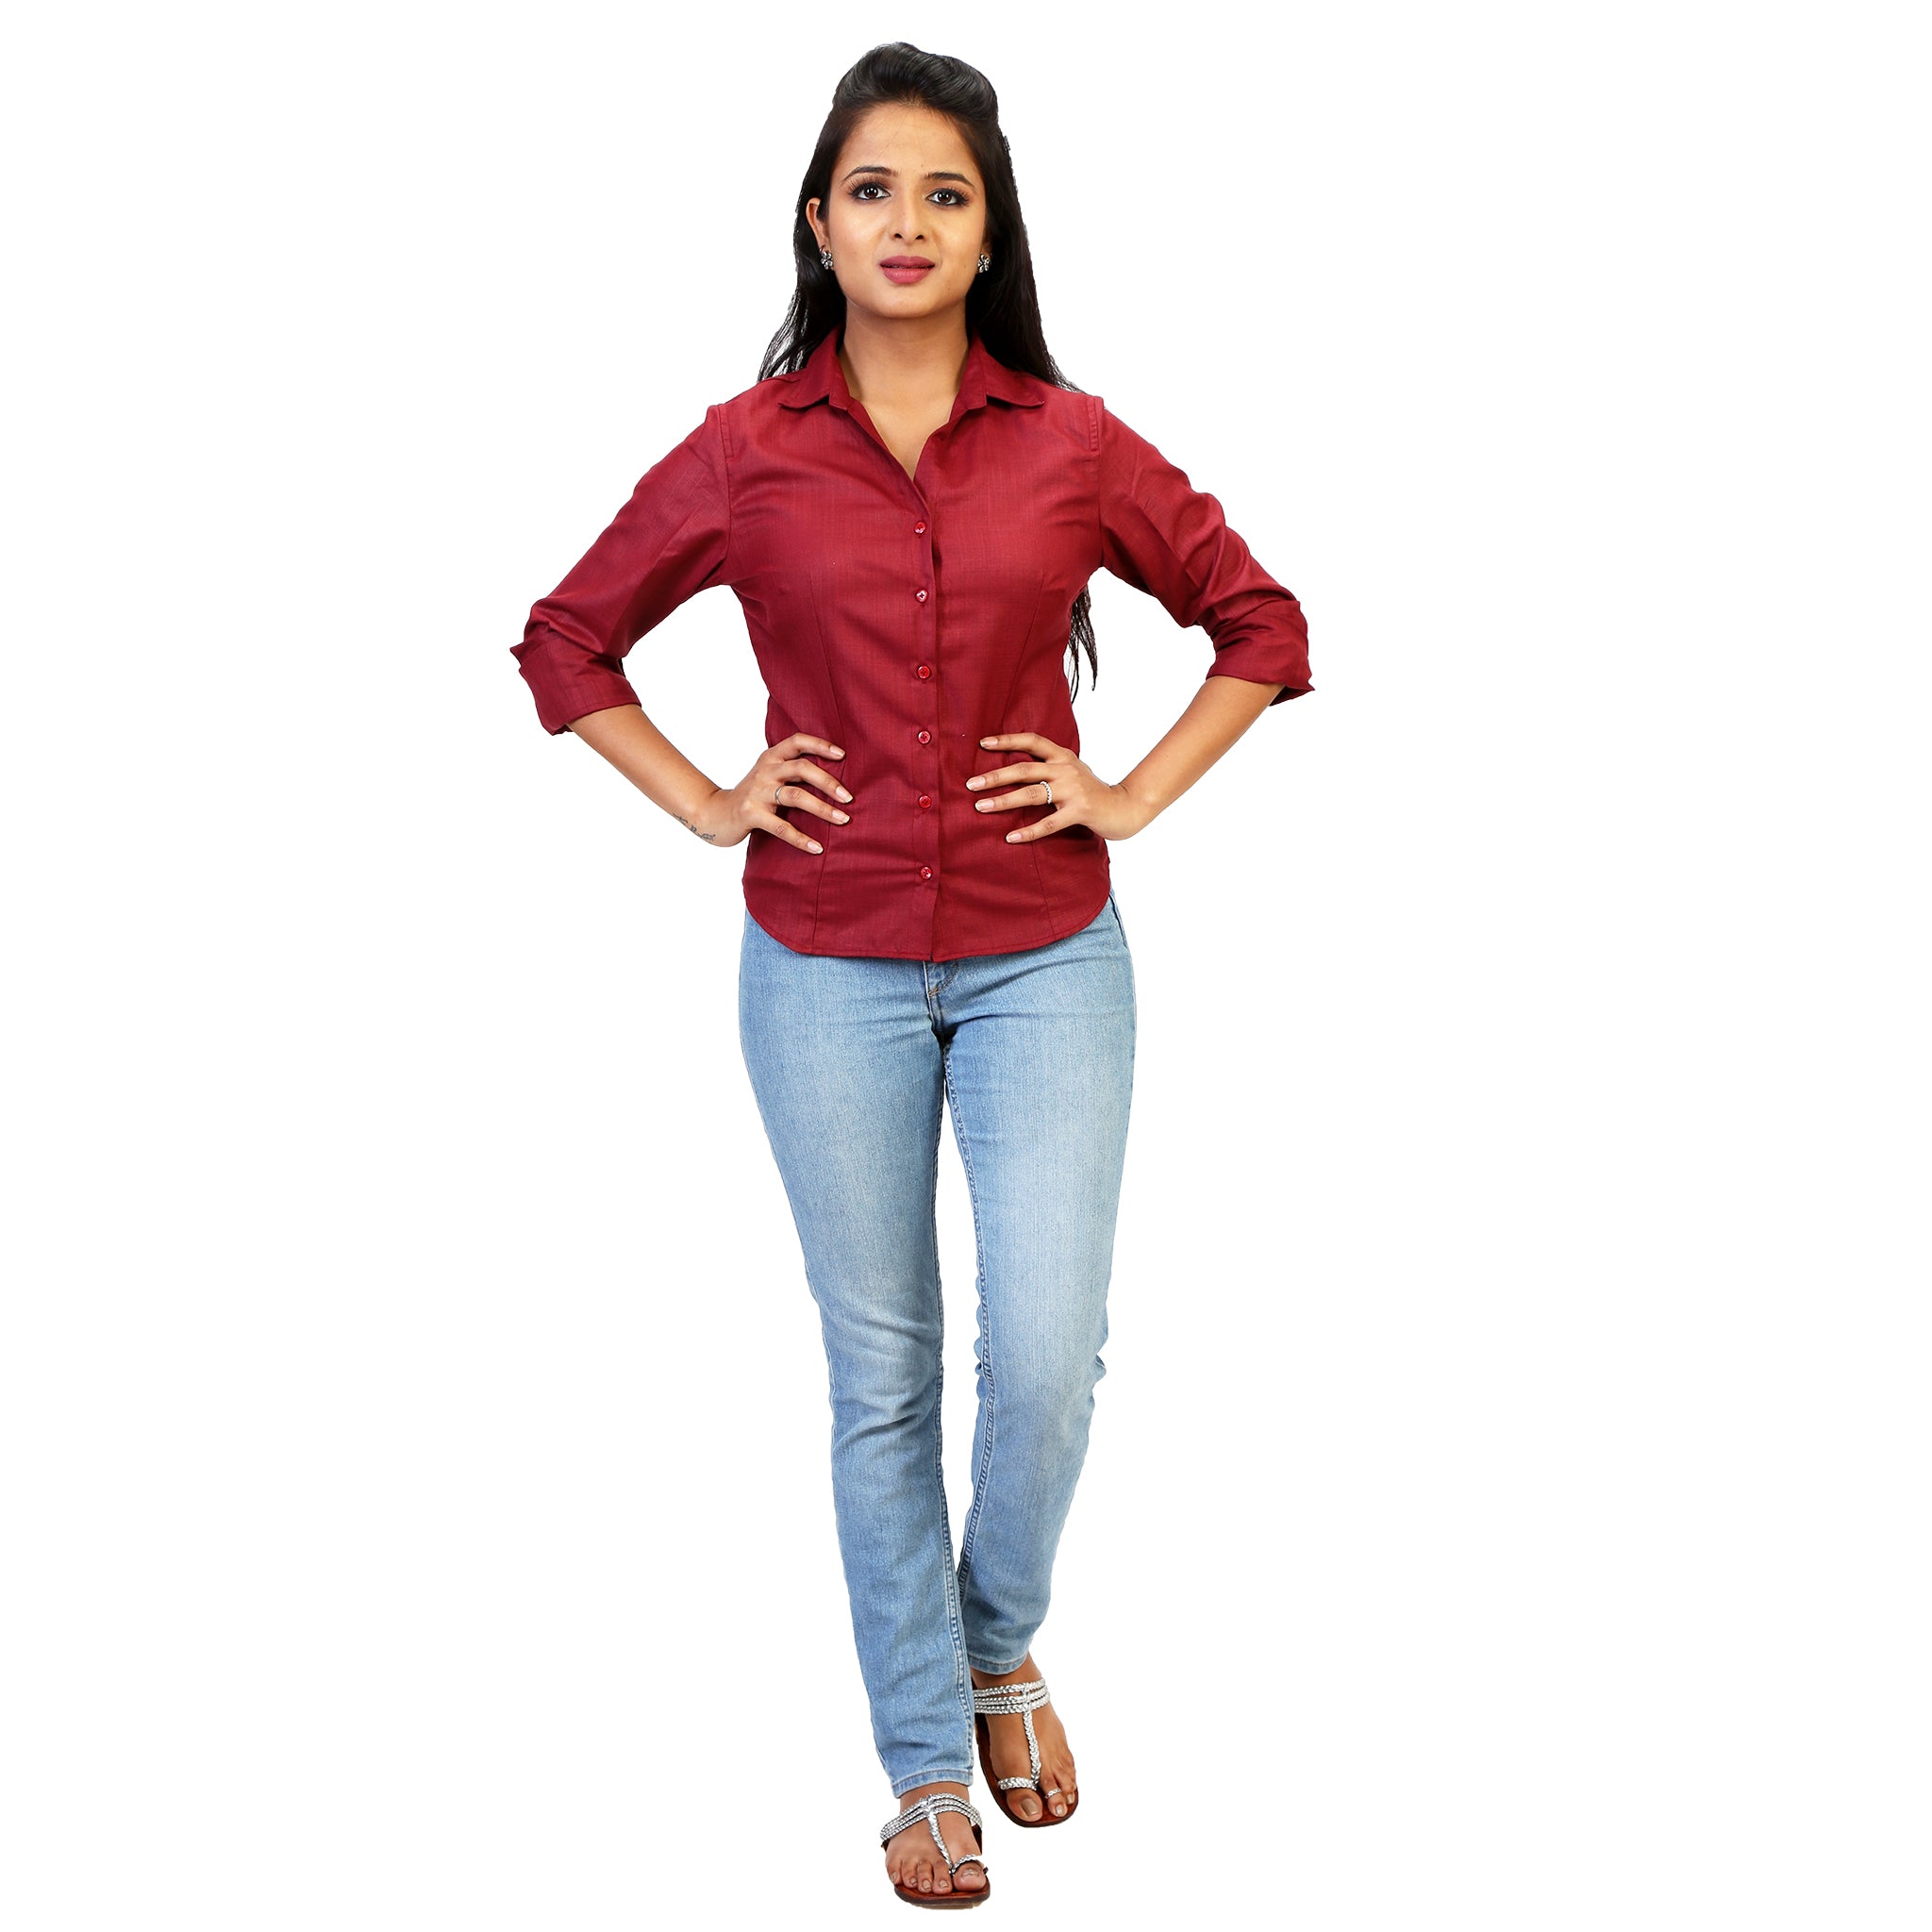 Discover more than 162 red shirt blue jeans best